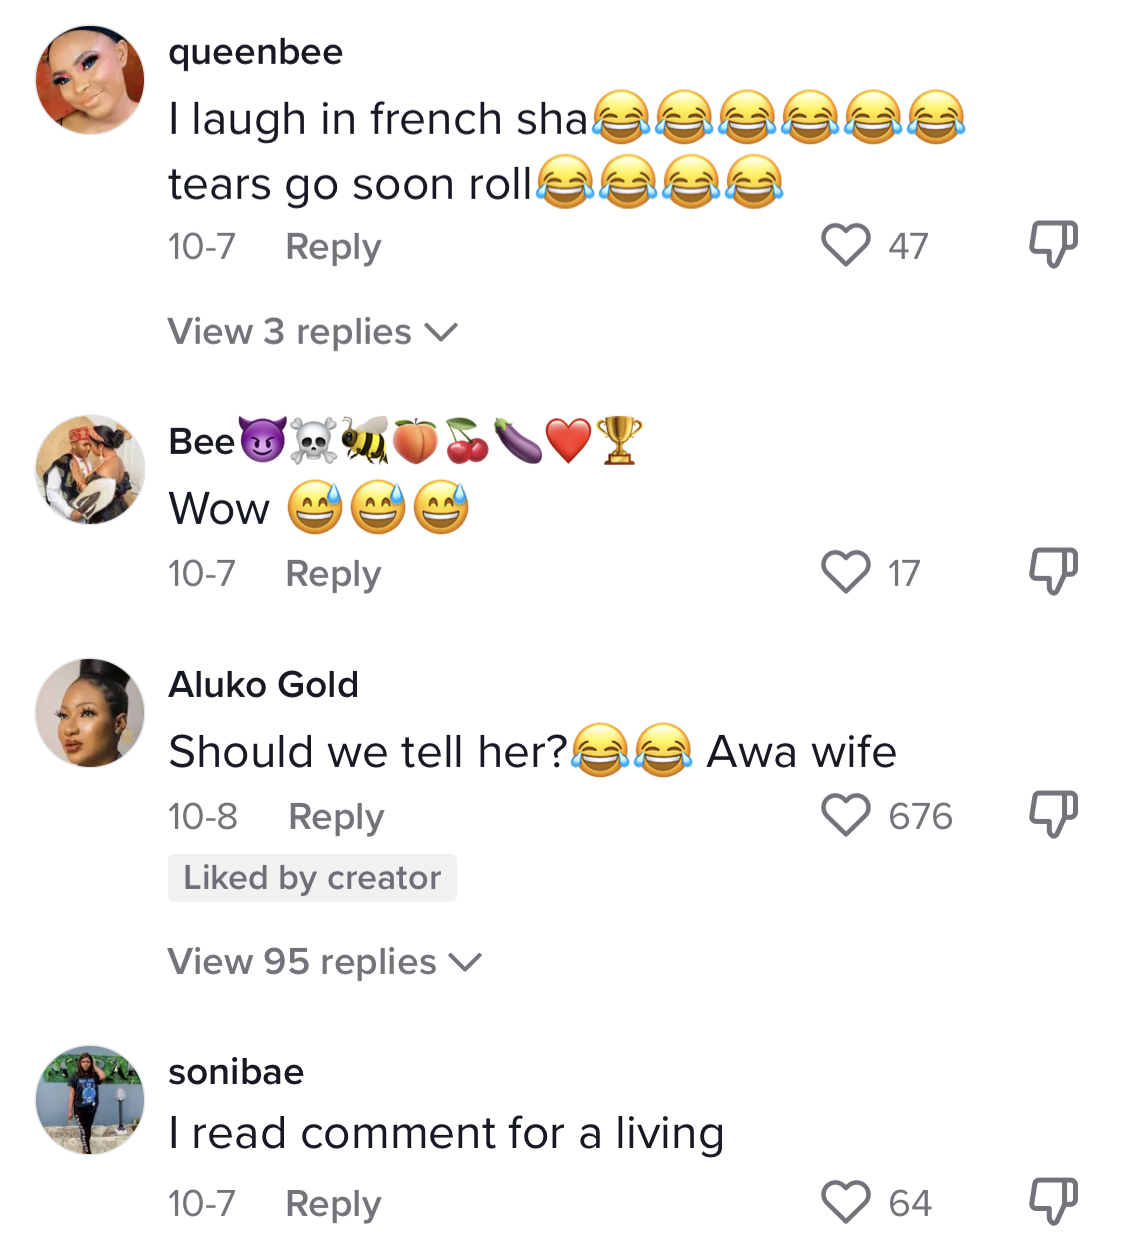 I cook for him, his family knows me - Lady lists 5 reasons her boyfriend can never cheat on her [video]